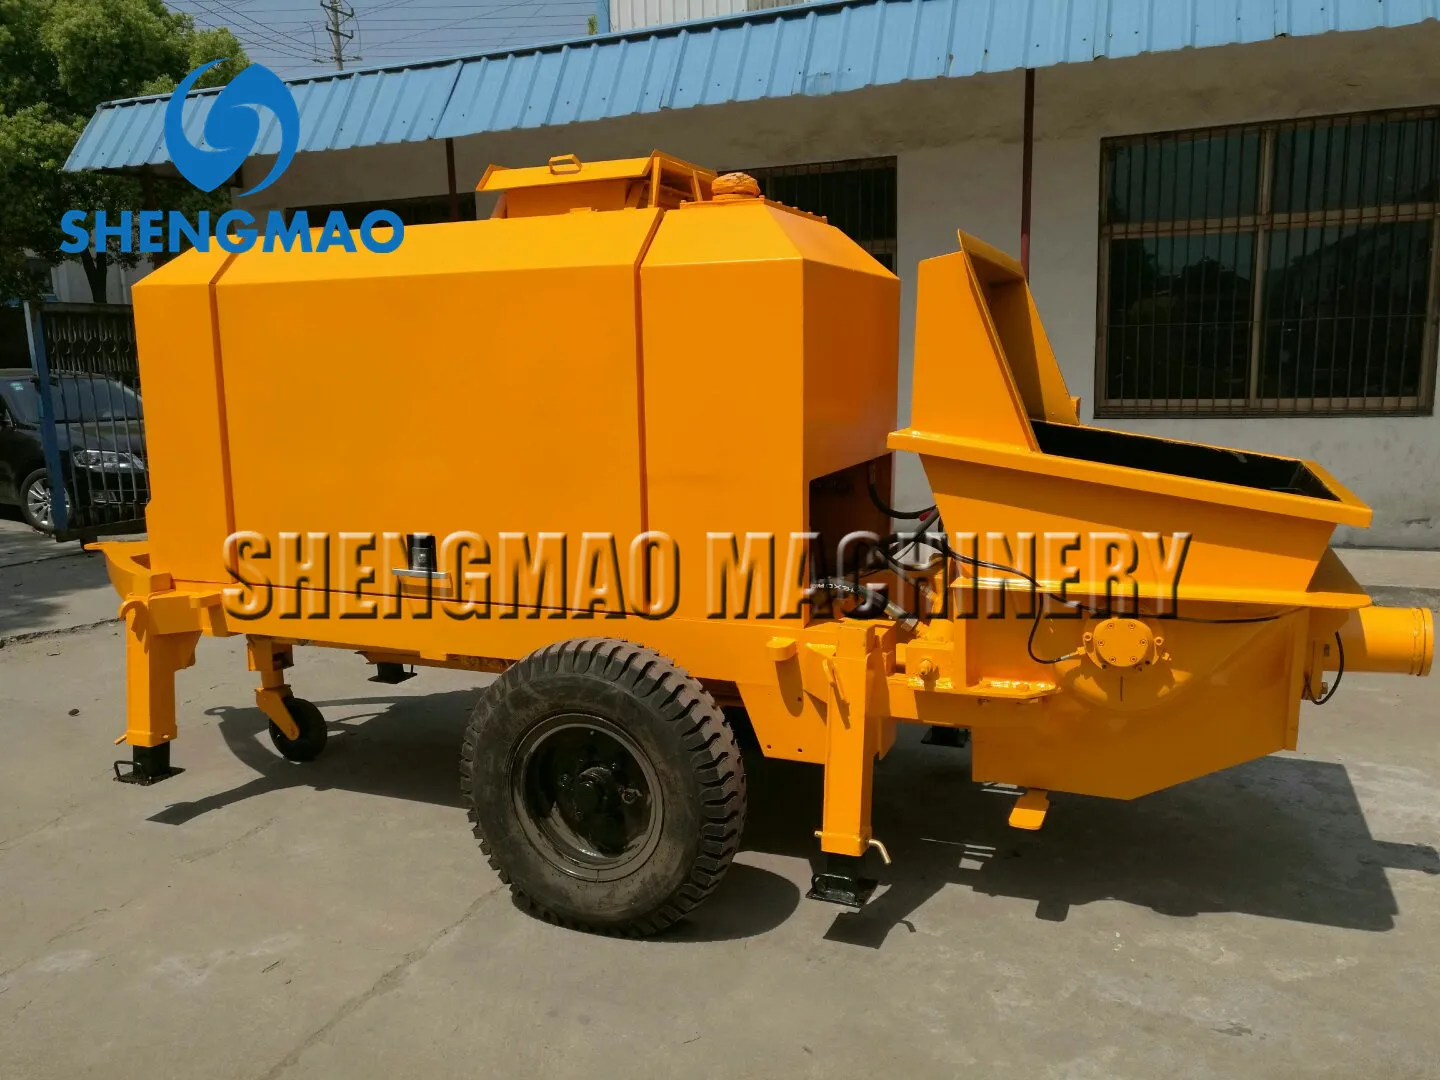 High Pressure Concrete Pump Cement Grouting Machine Power Building Liquid Weight Material Type